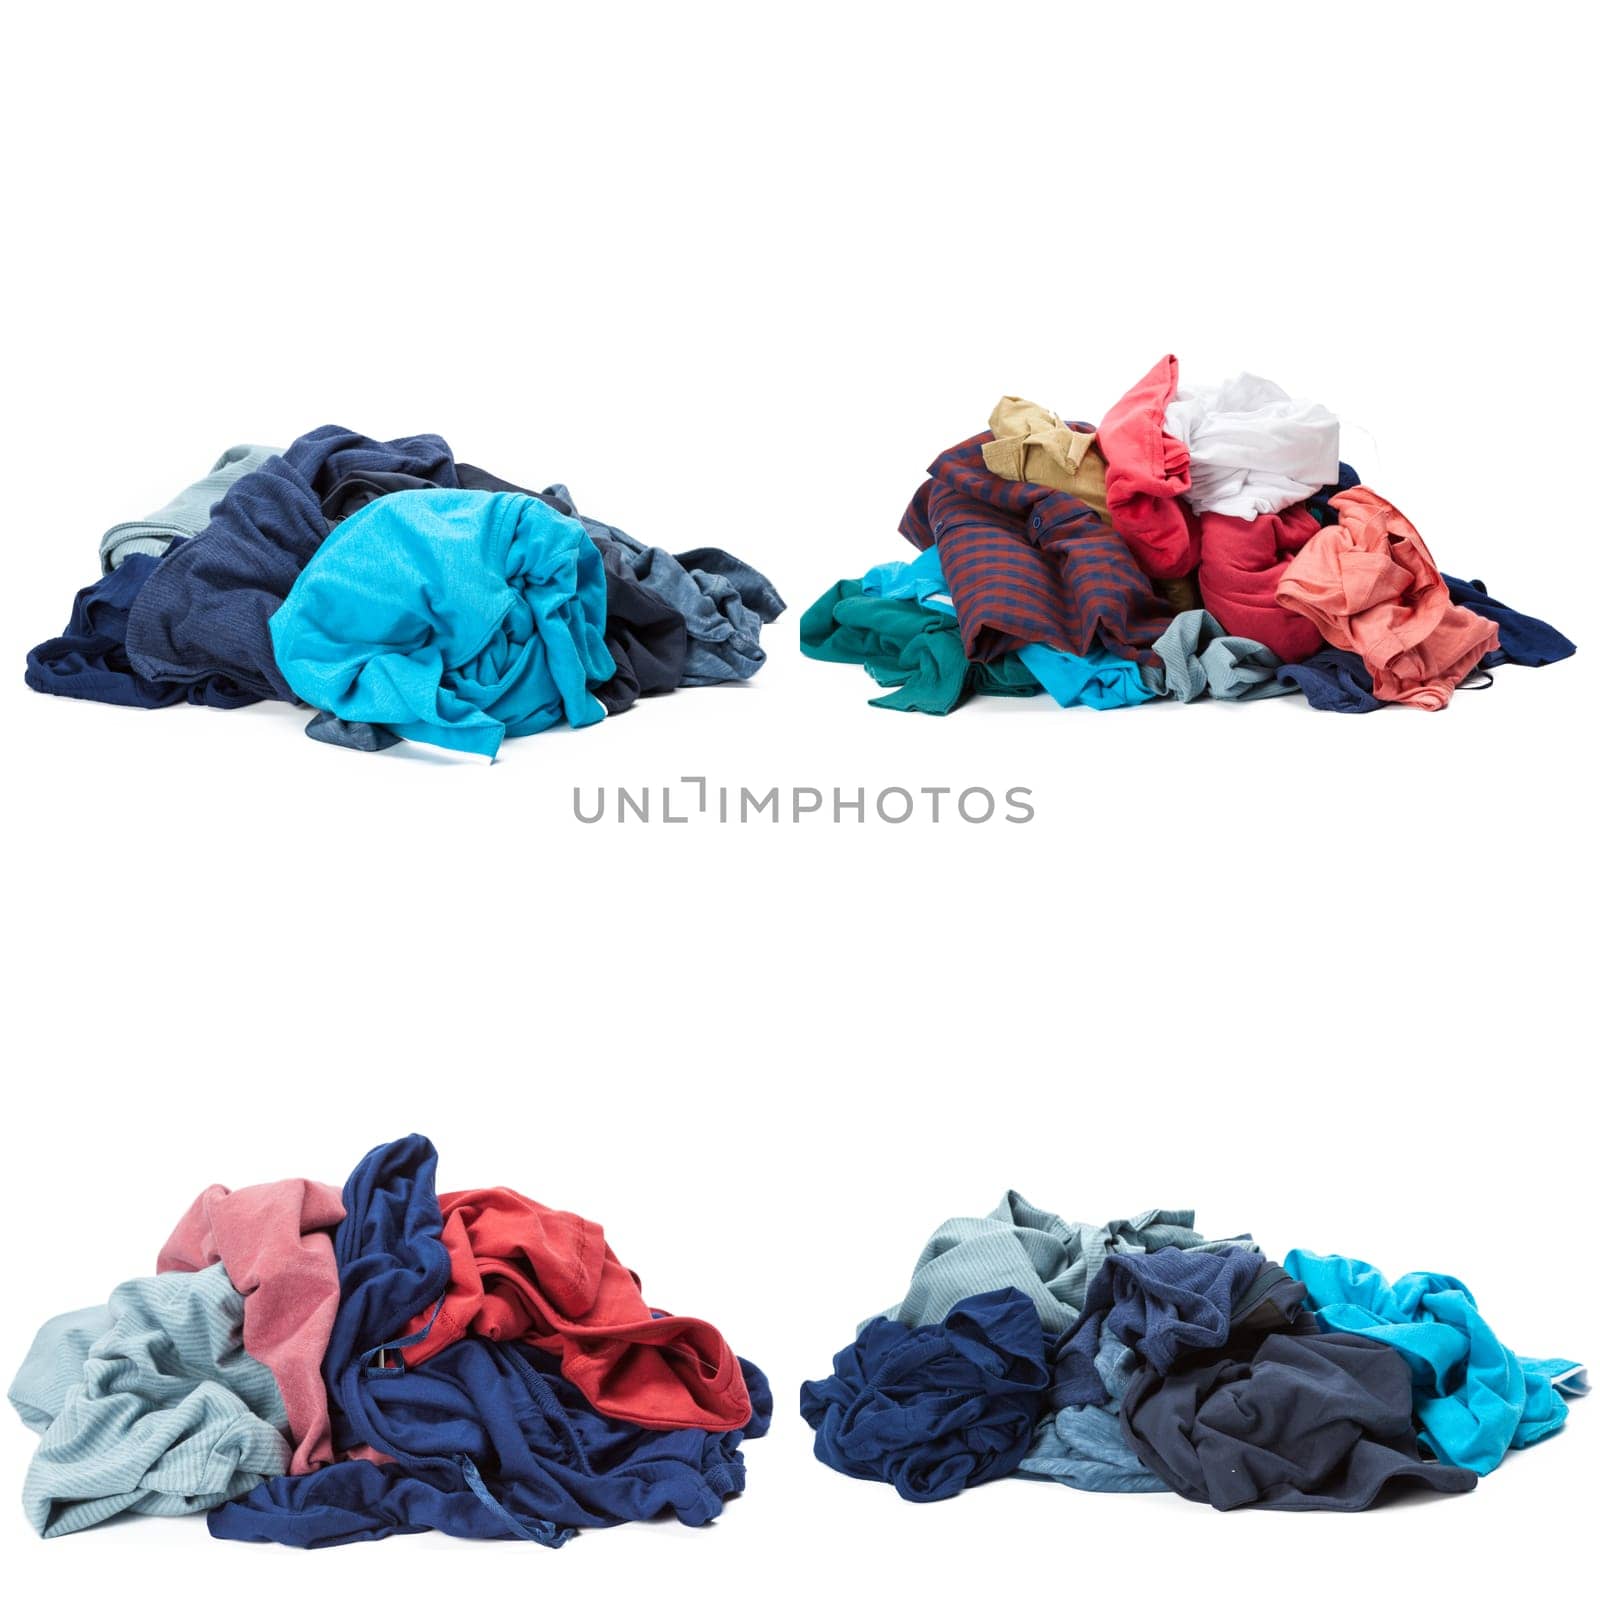 Stack of clothes isolated on white background